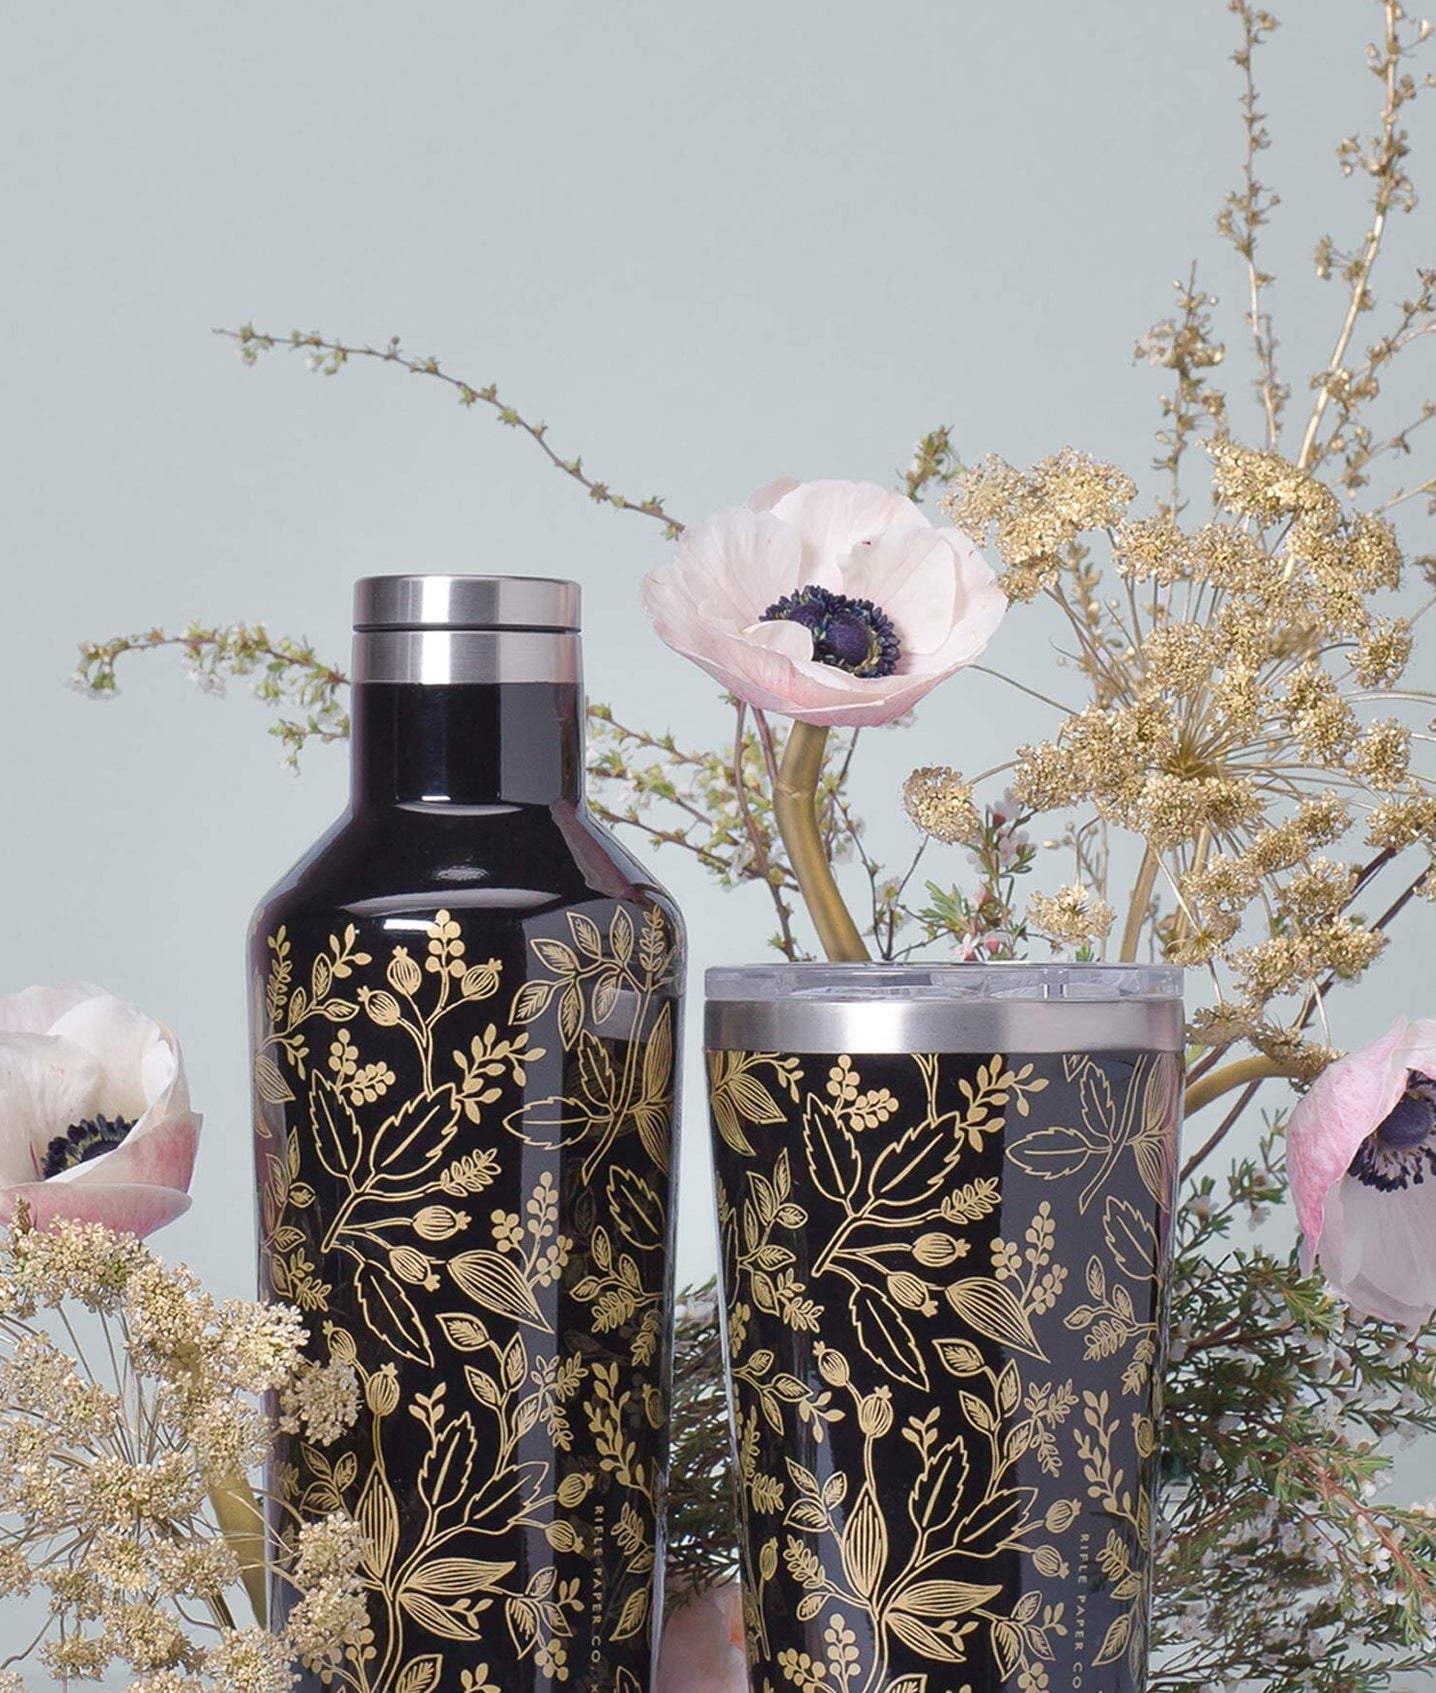 the black and floral bottles 